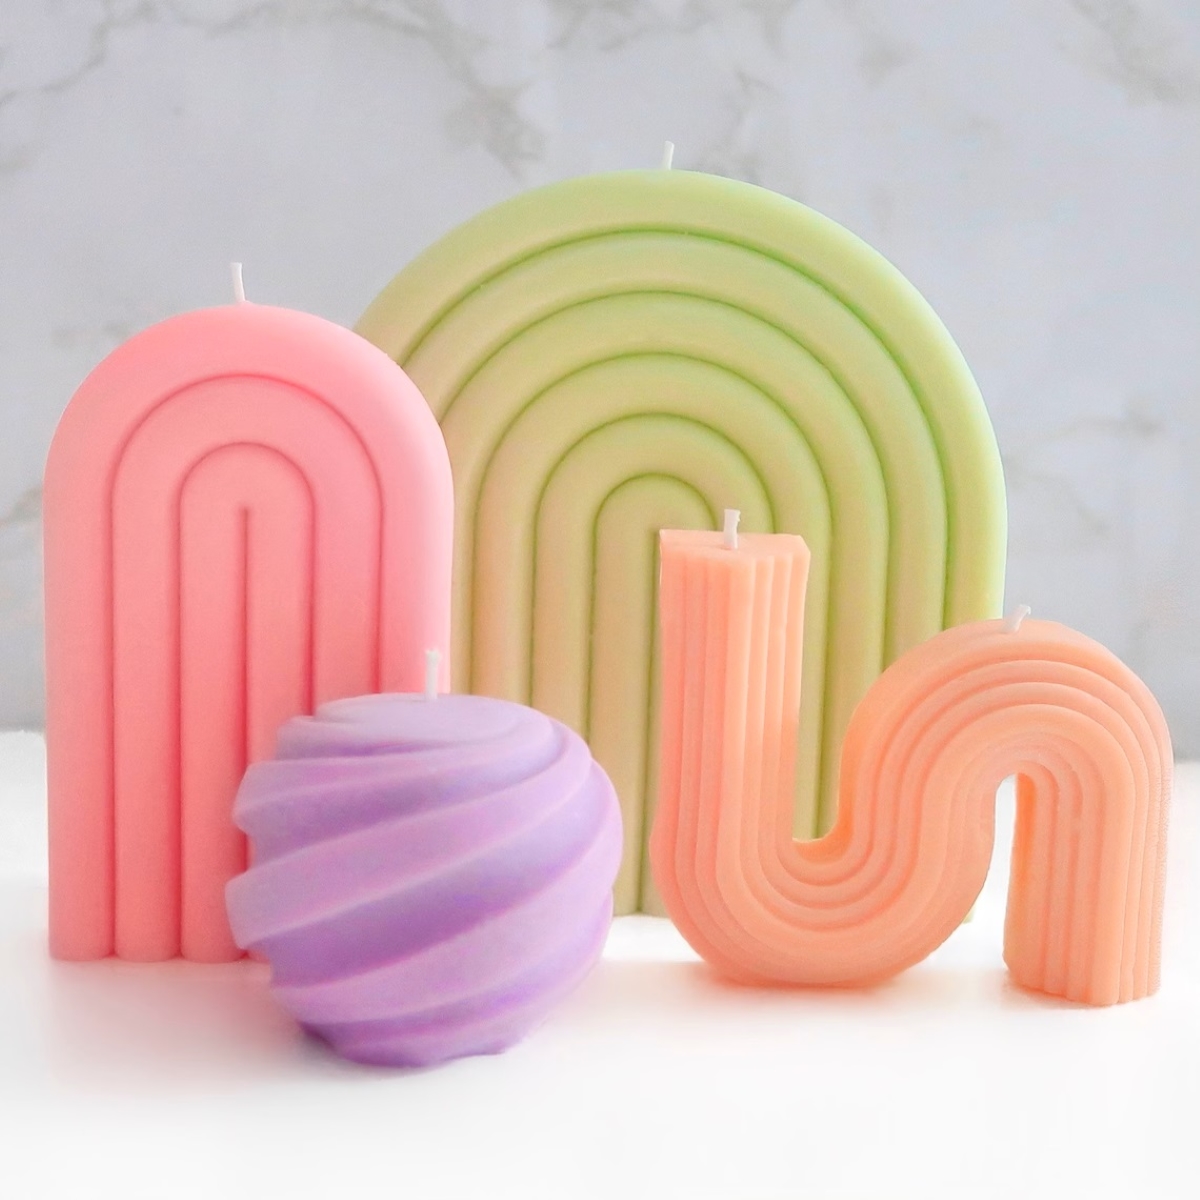 decor with candles - colorful unique shaped candles